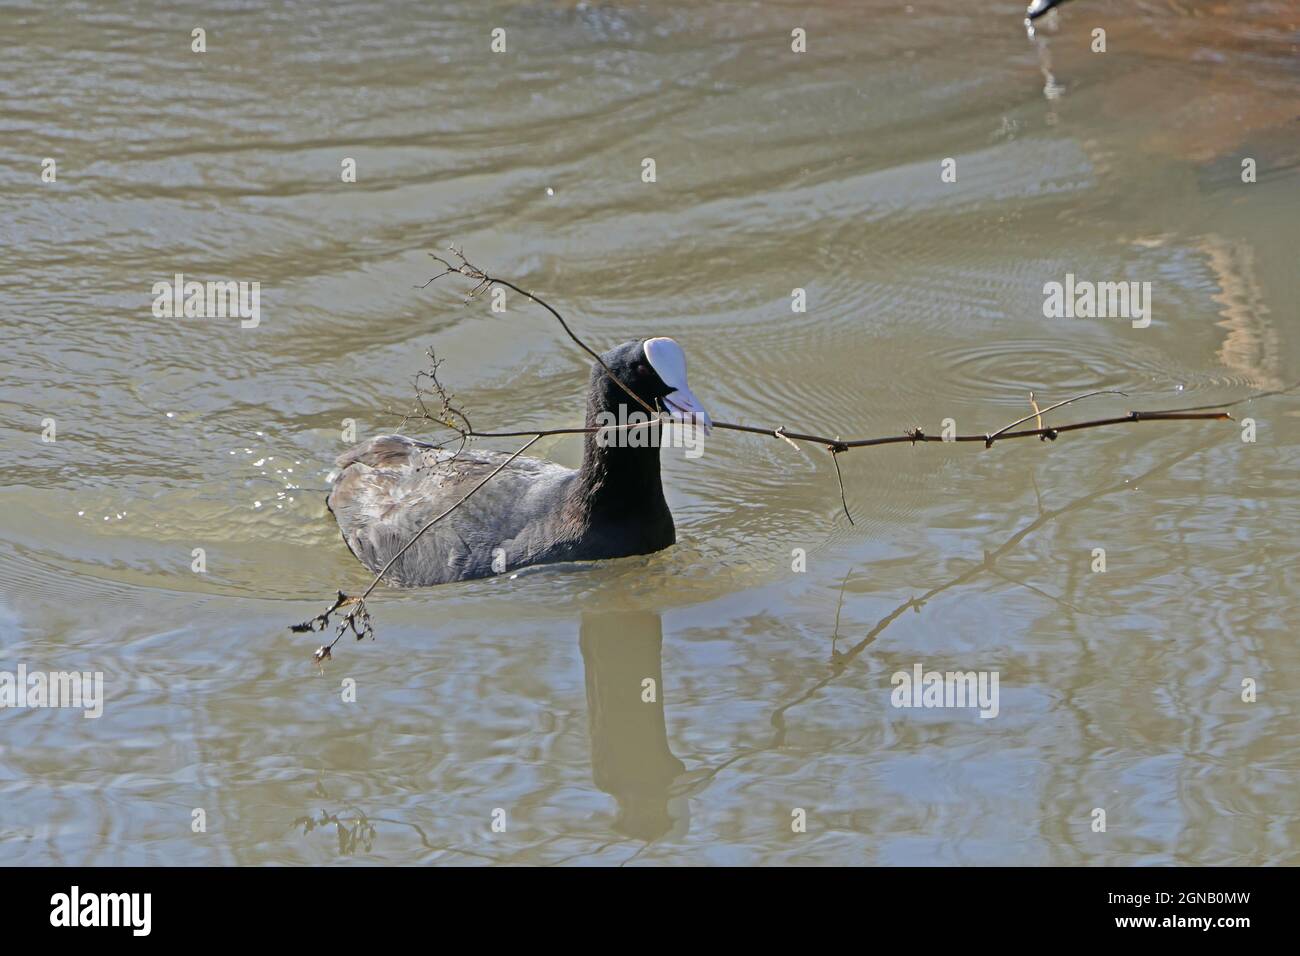 Eurasian coot bird with twig in beak in water collecting nesting material Stock Photo